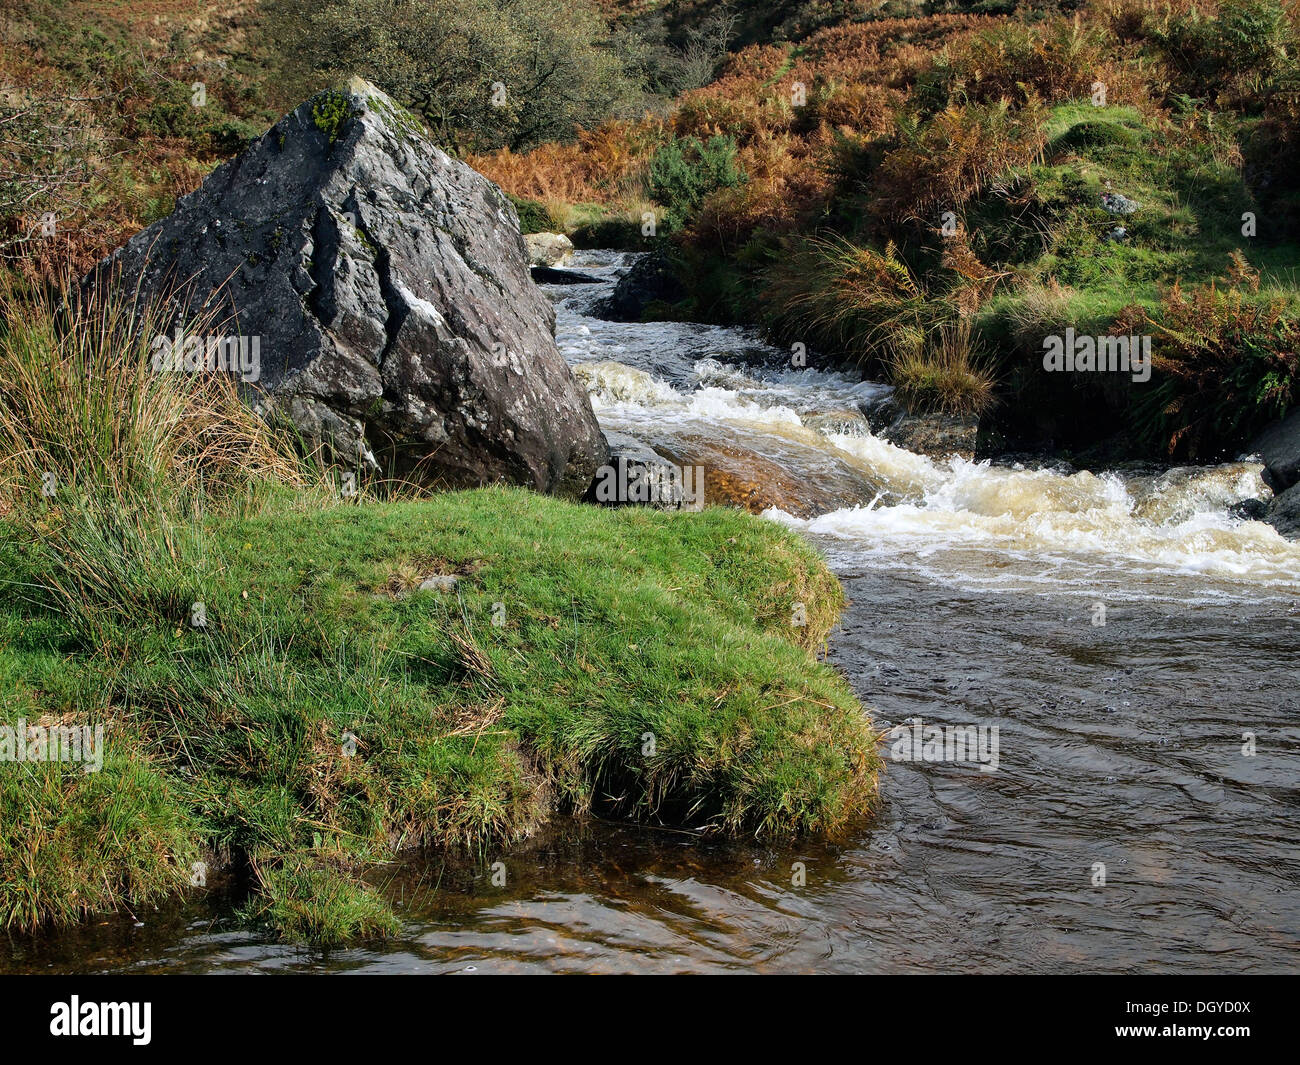 Upper course of the River Lyd below its source on Dartmoor. A typical moorland stream in its youthful stage after heavy rain. Stock Photo